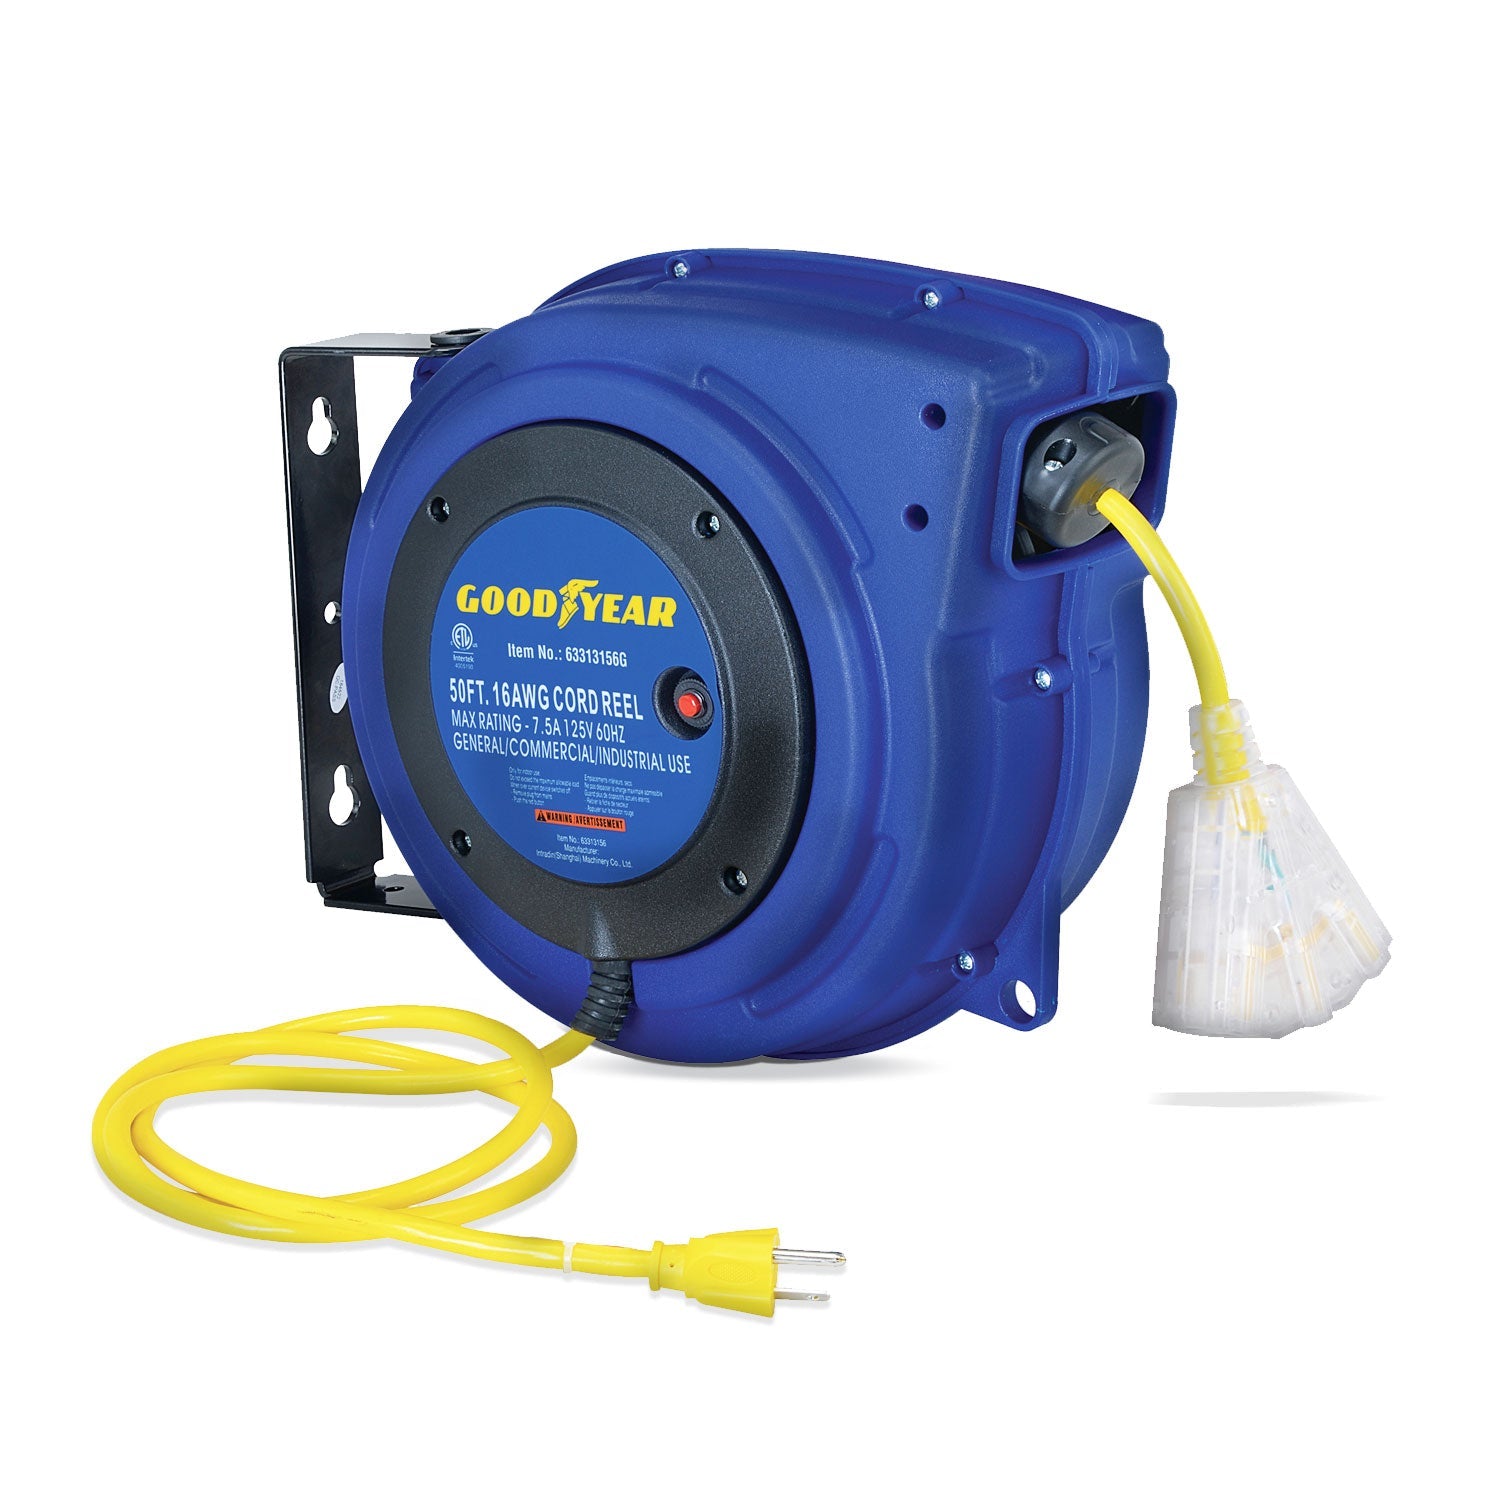 Goodyear Mountable Retractable Extension Cord Reel - 16AWG x 50' Ft, 3 Grounded Outlets, Max 15A